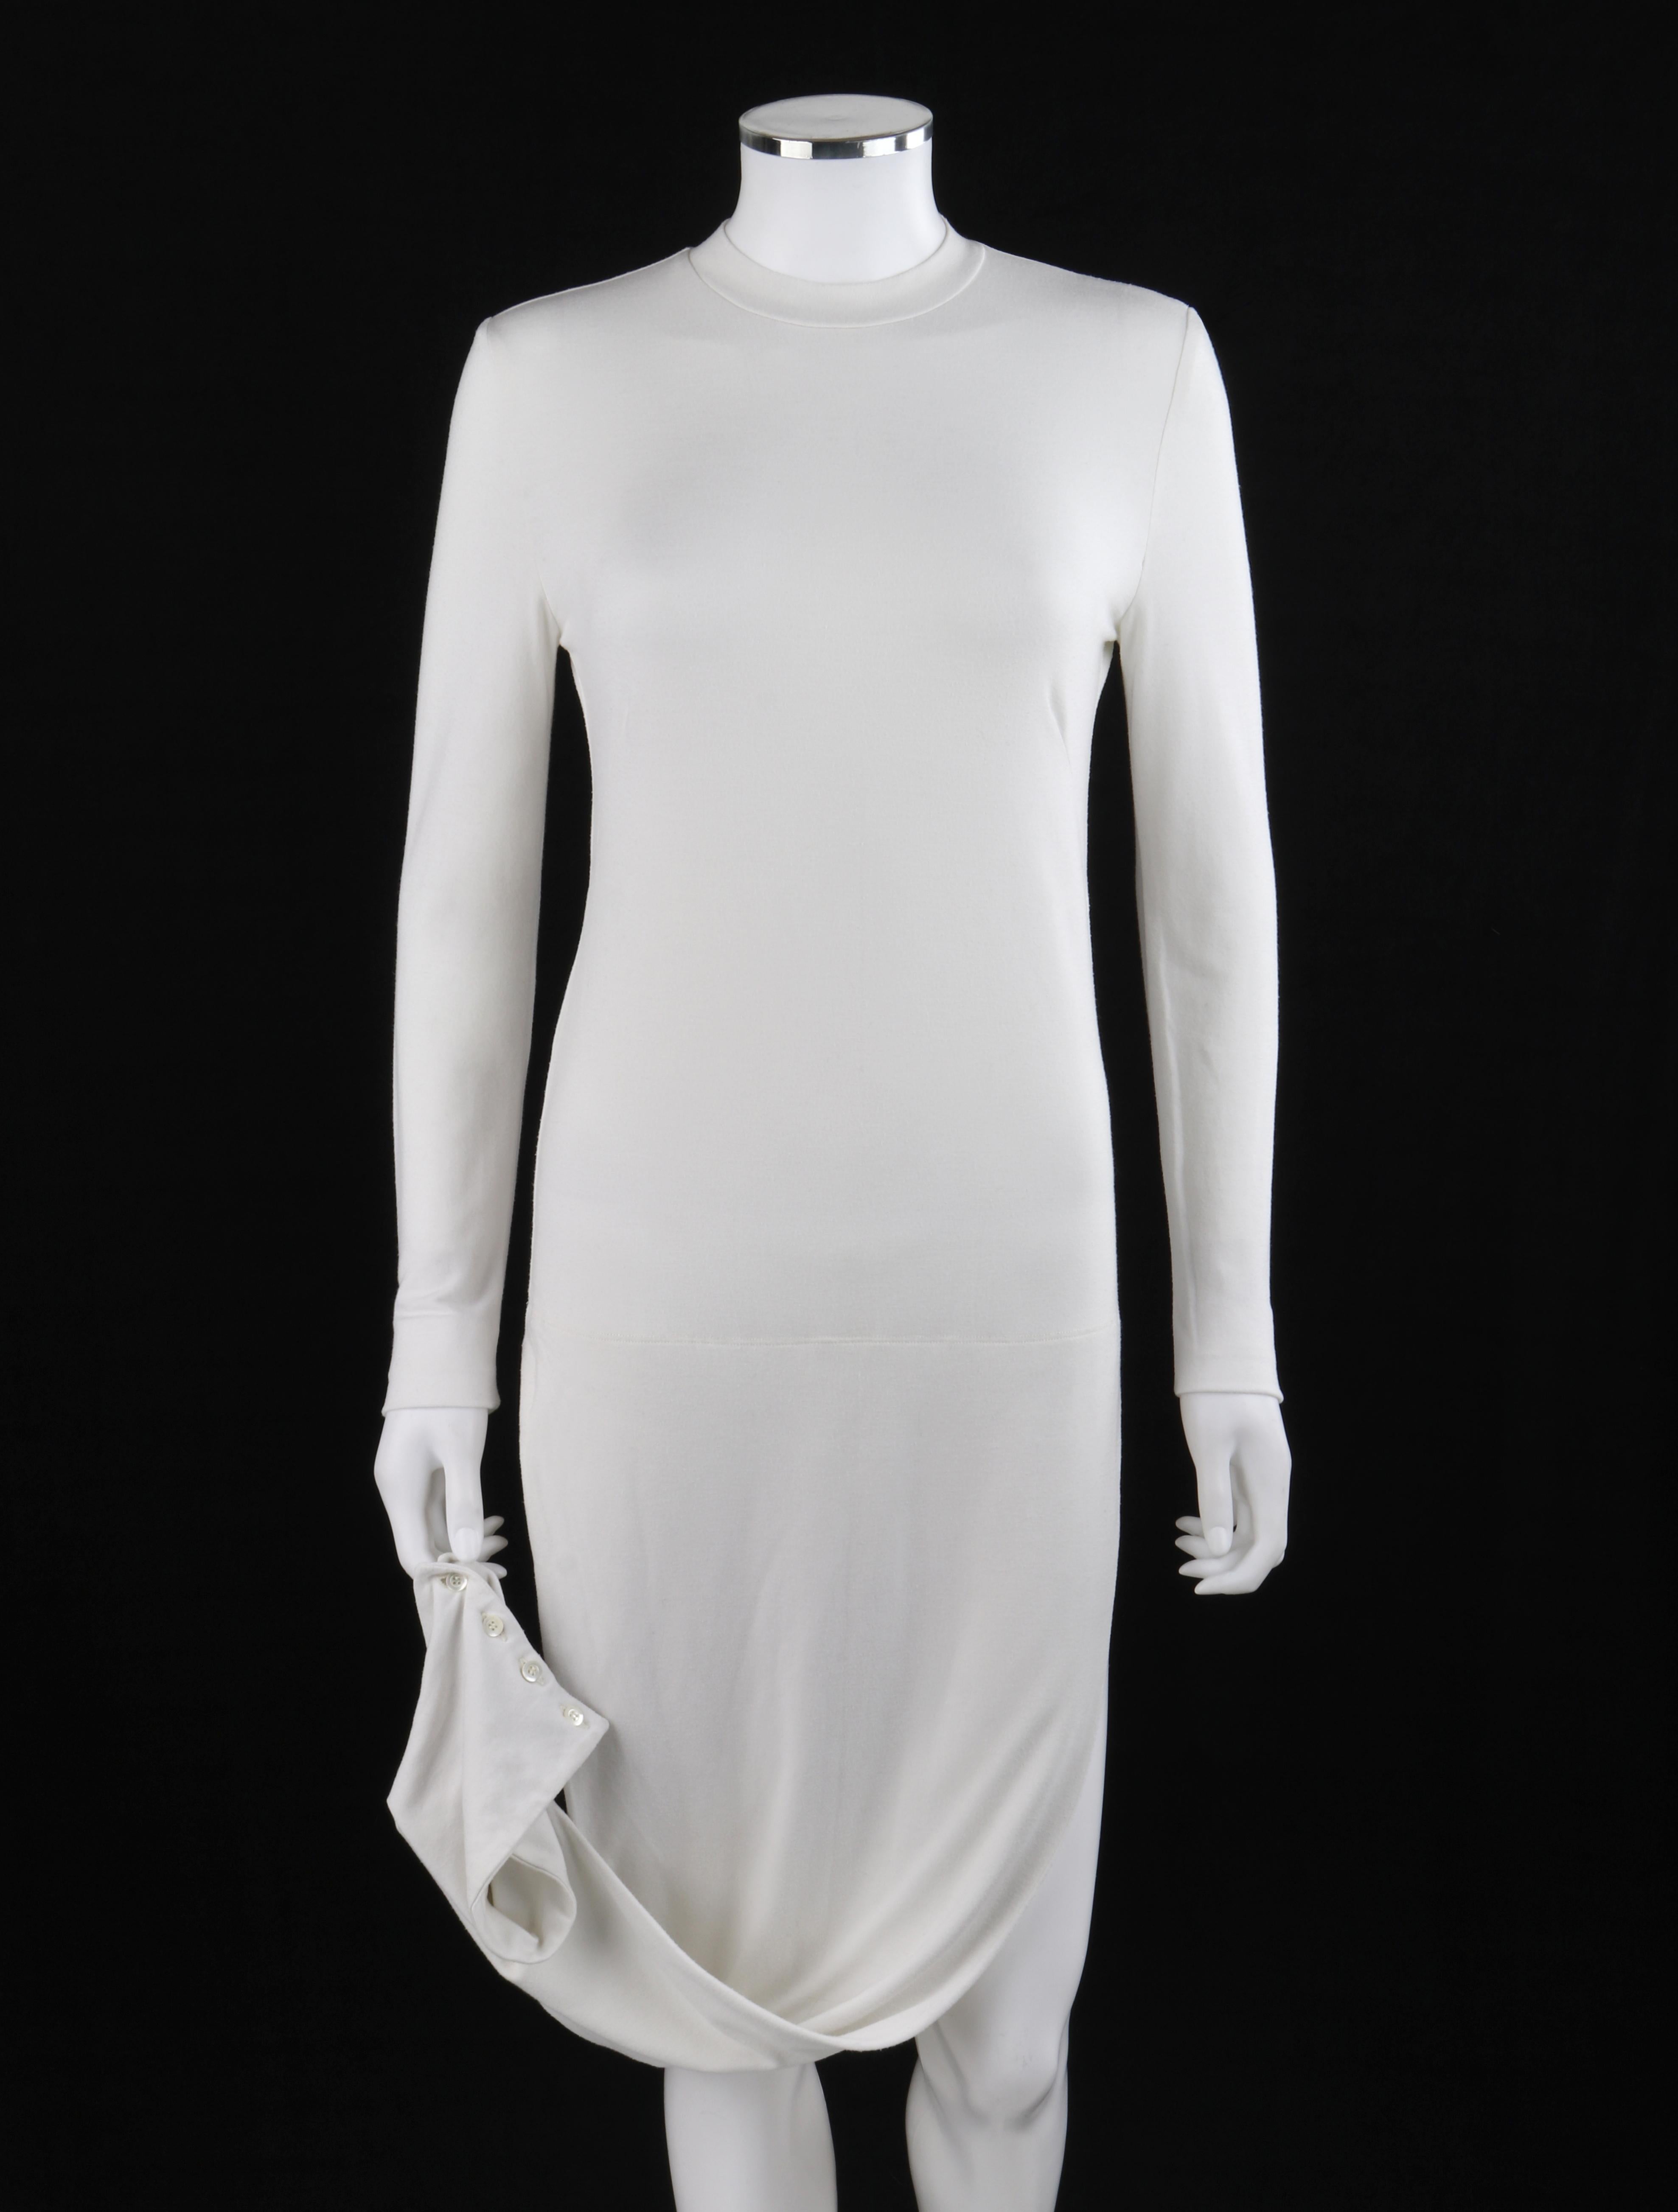 ALEXANDER McQUEEN S/S 2000 “Eye” White Convertible Twisted Front High Neck Top For Sale 3